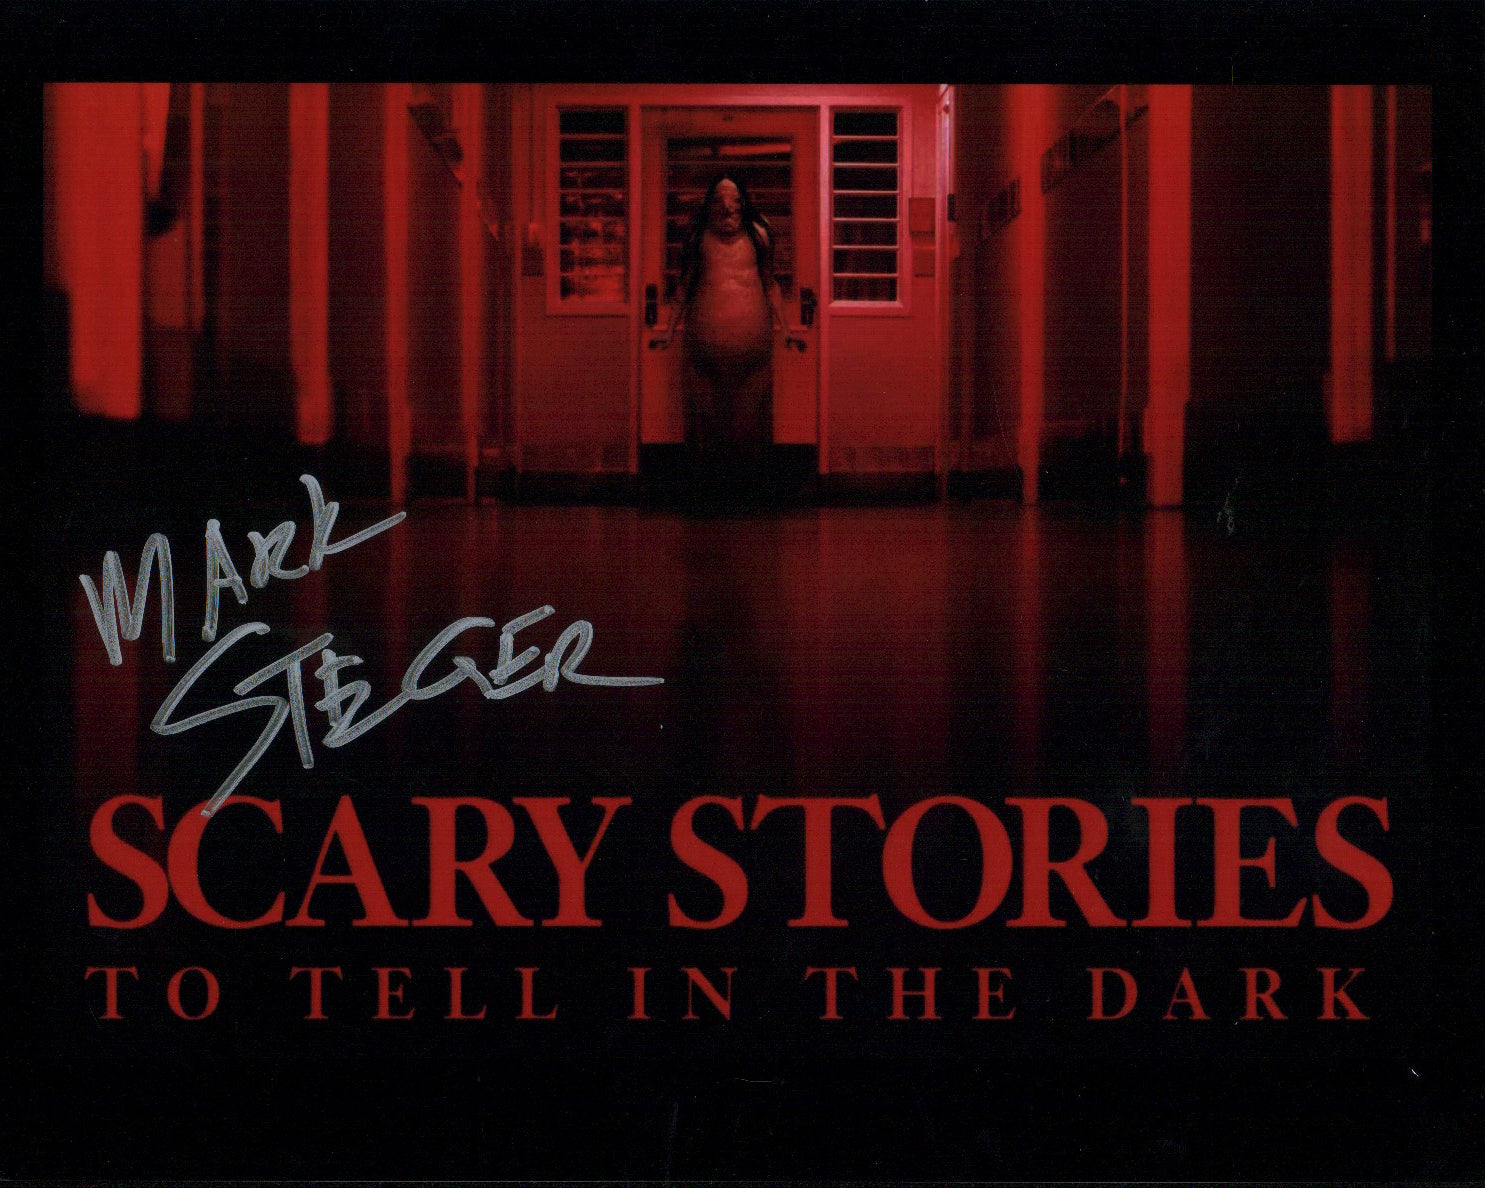 Mark Steger Scary Stories to Tell in the Dark 8x10 Signed Photo JSA Certified Autograph